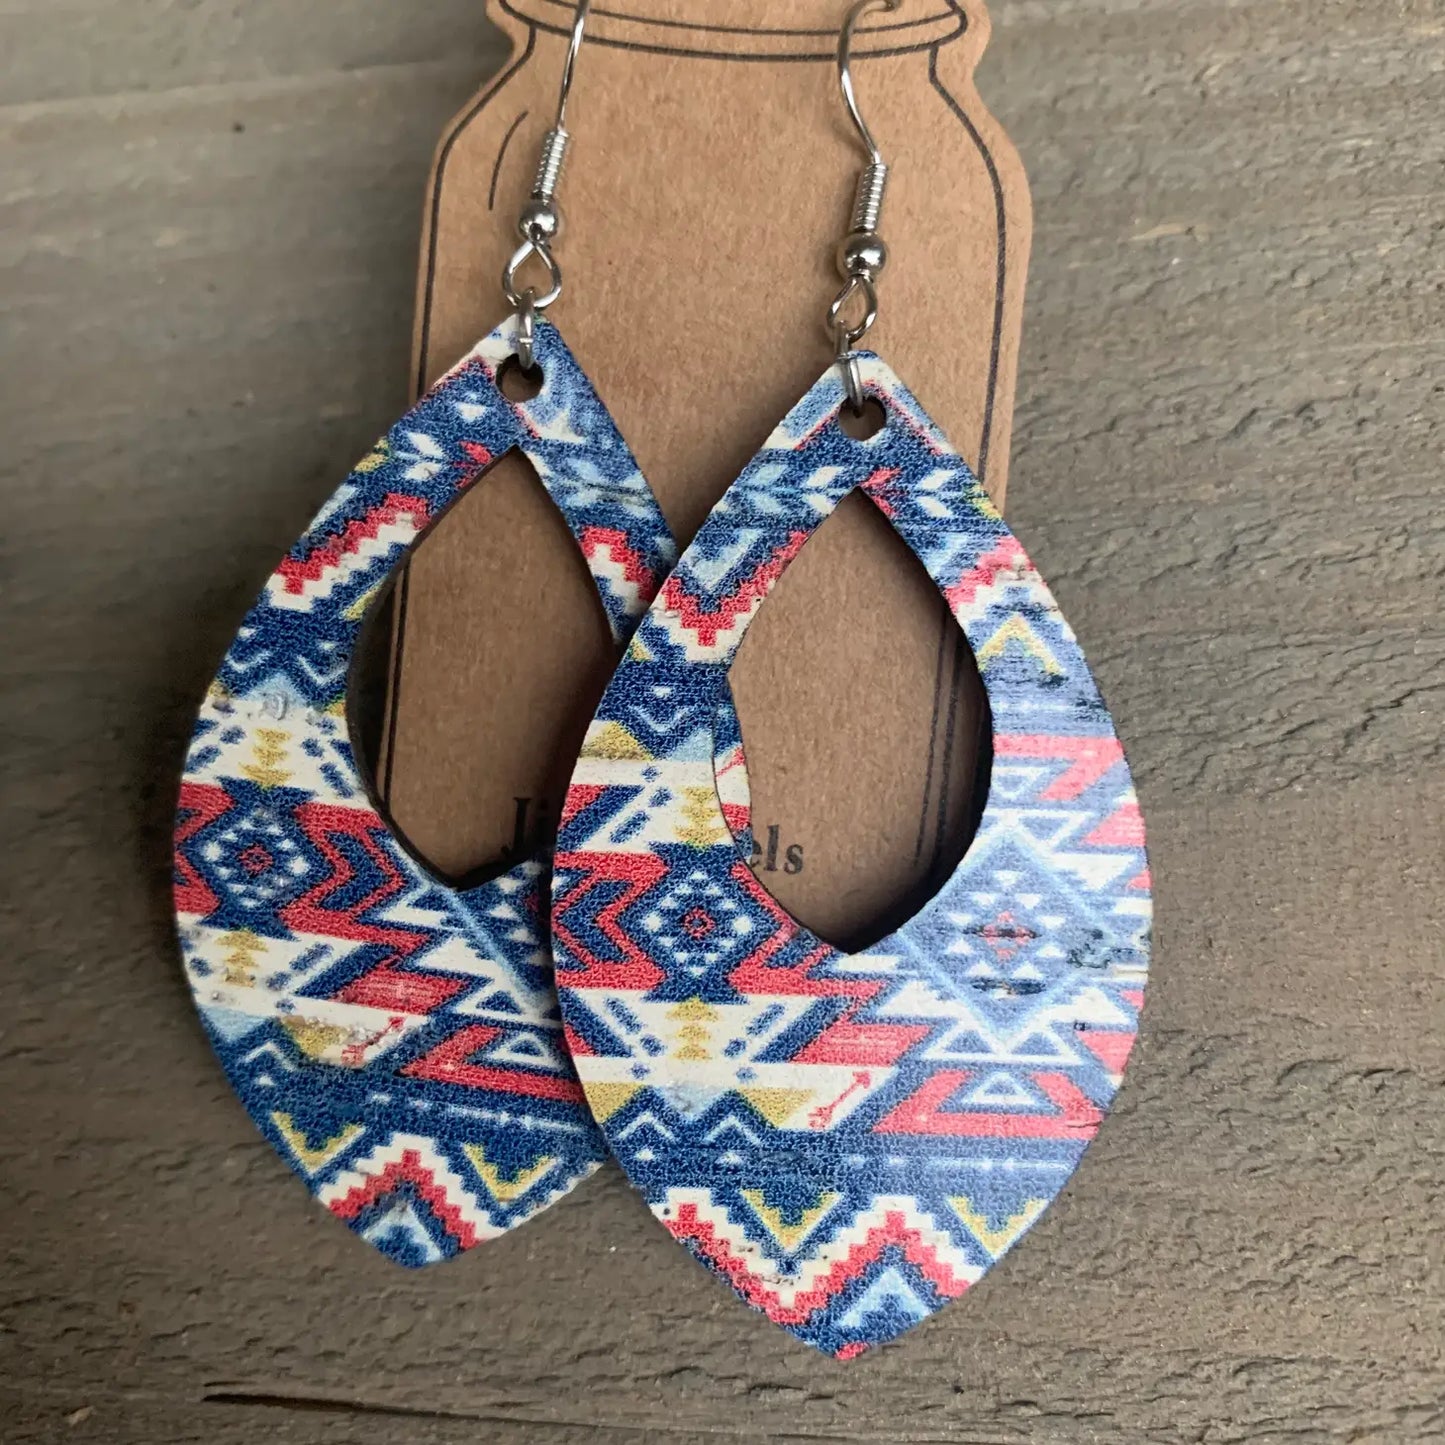 Aztec Design Earrings - Cork Fabric with Leather backing